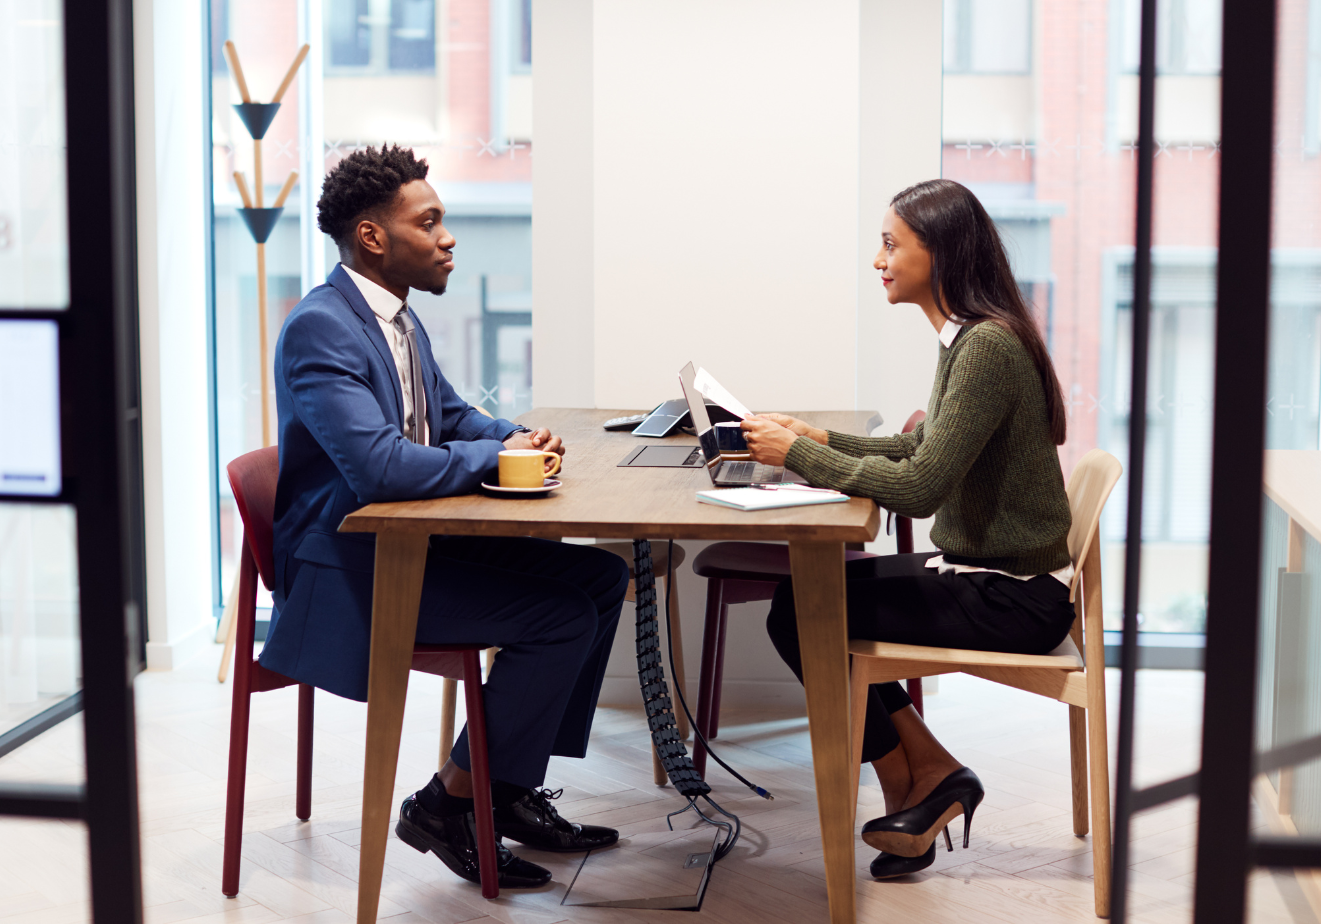 Man and woman sitting down at a job interview